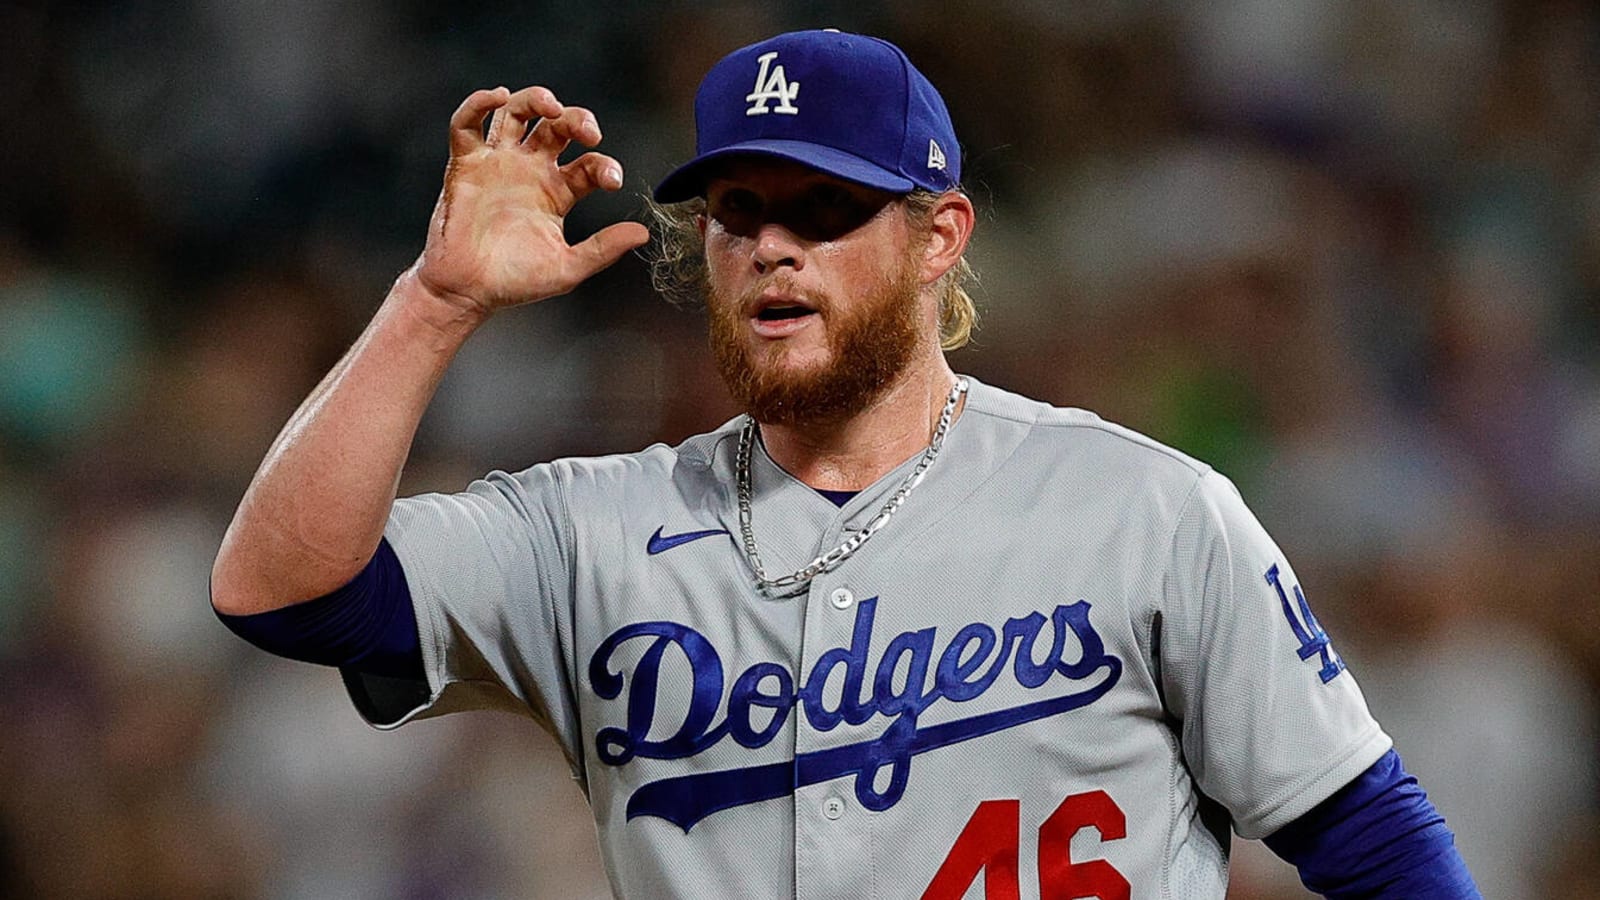 Dave Roberts on Craig Kimbrel: 'He's got to continue to work on some things'